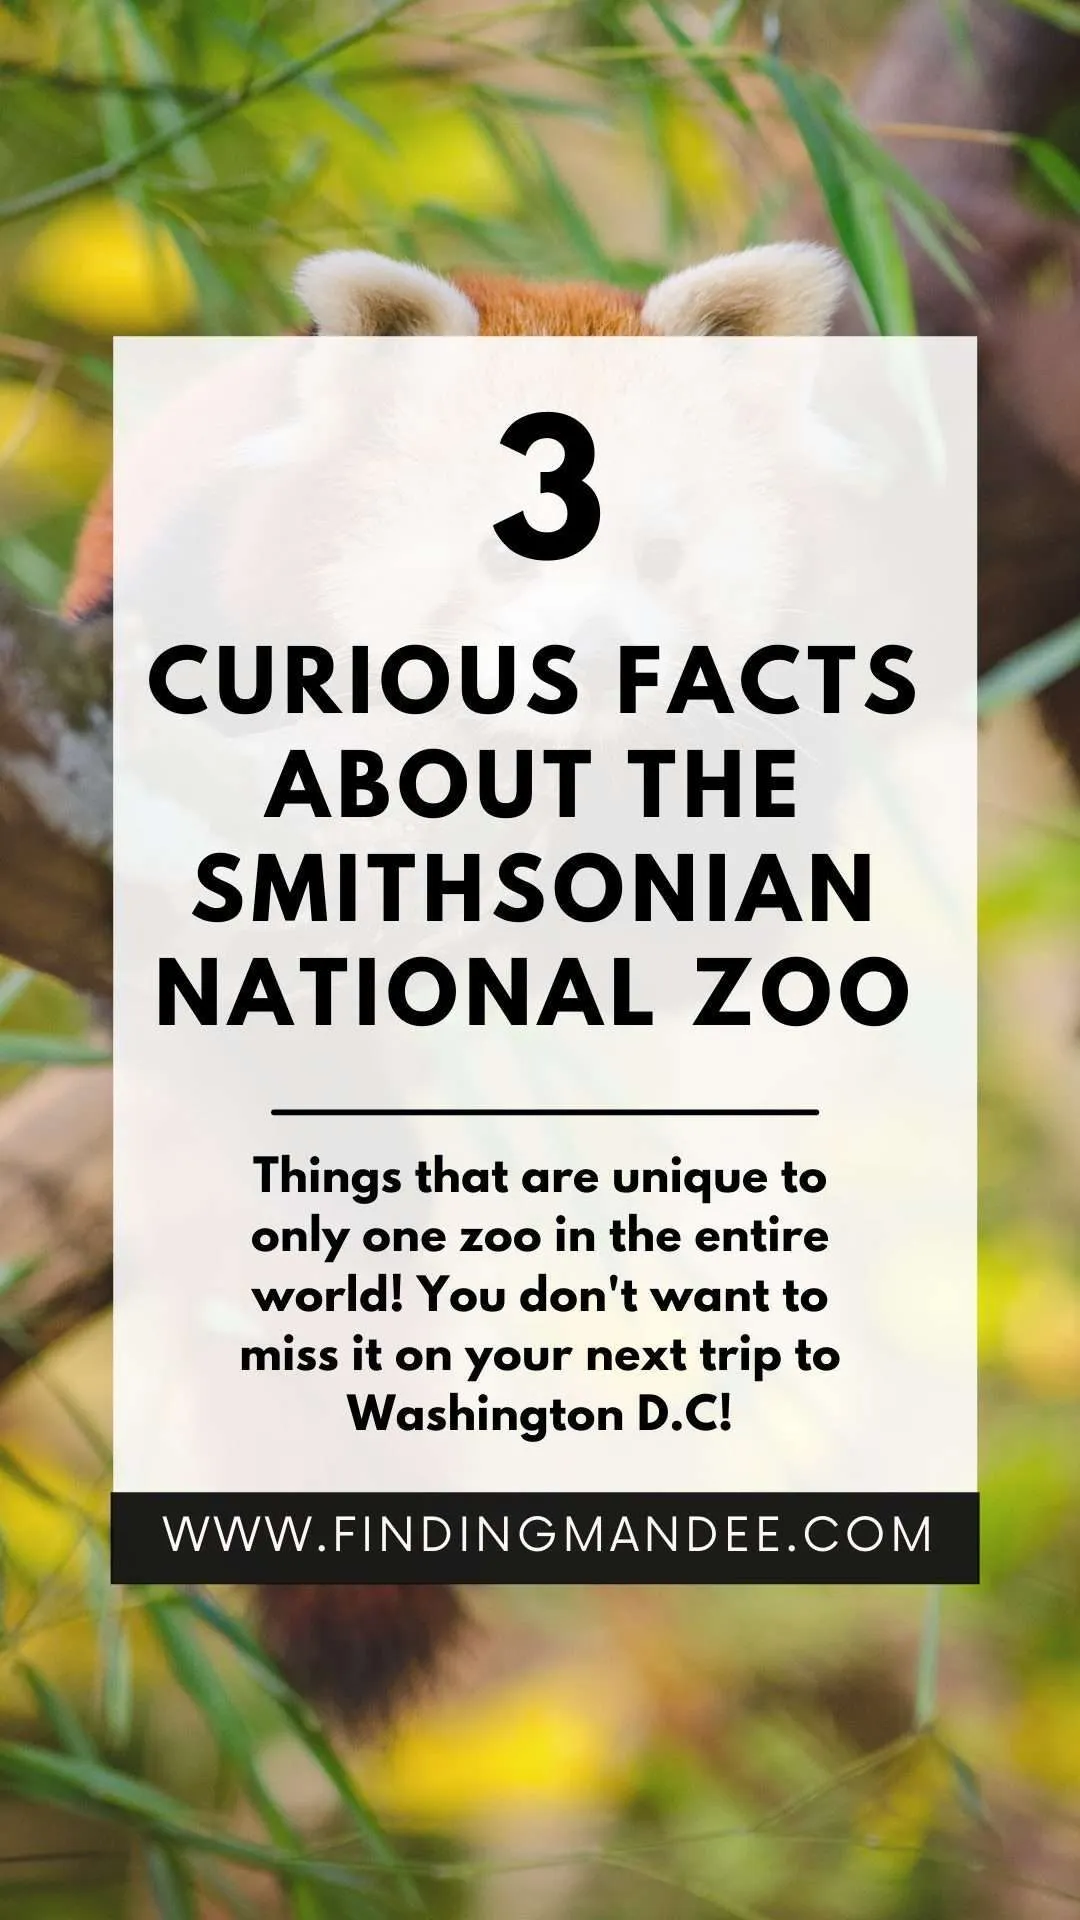 3 Curious Facts About the Smithsonian National Zoo | Finding Mandee